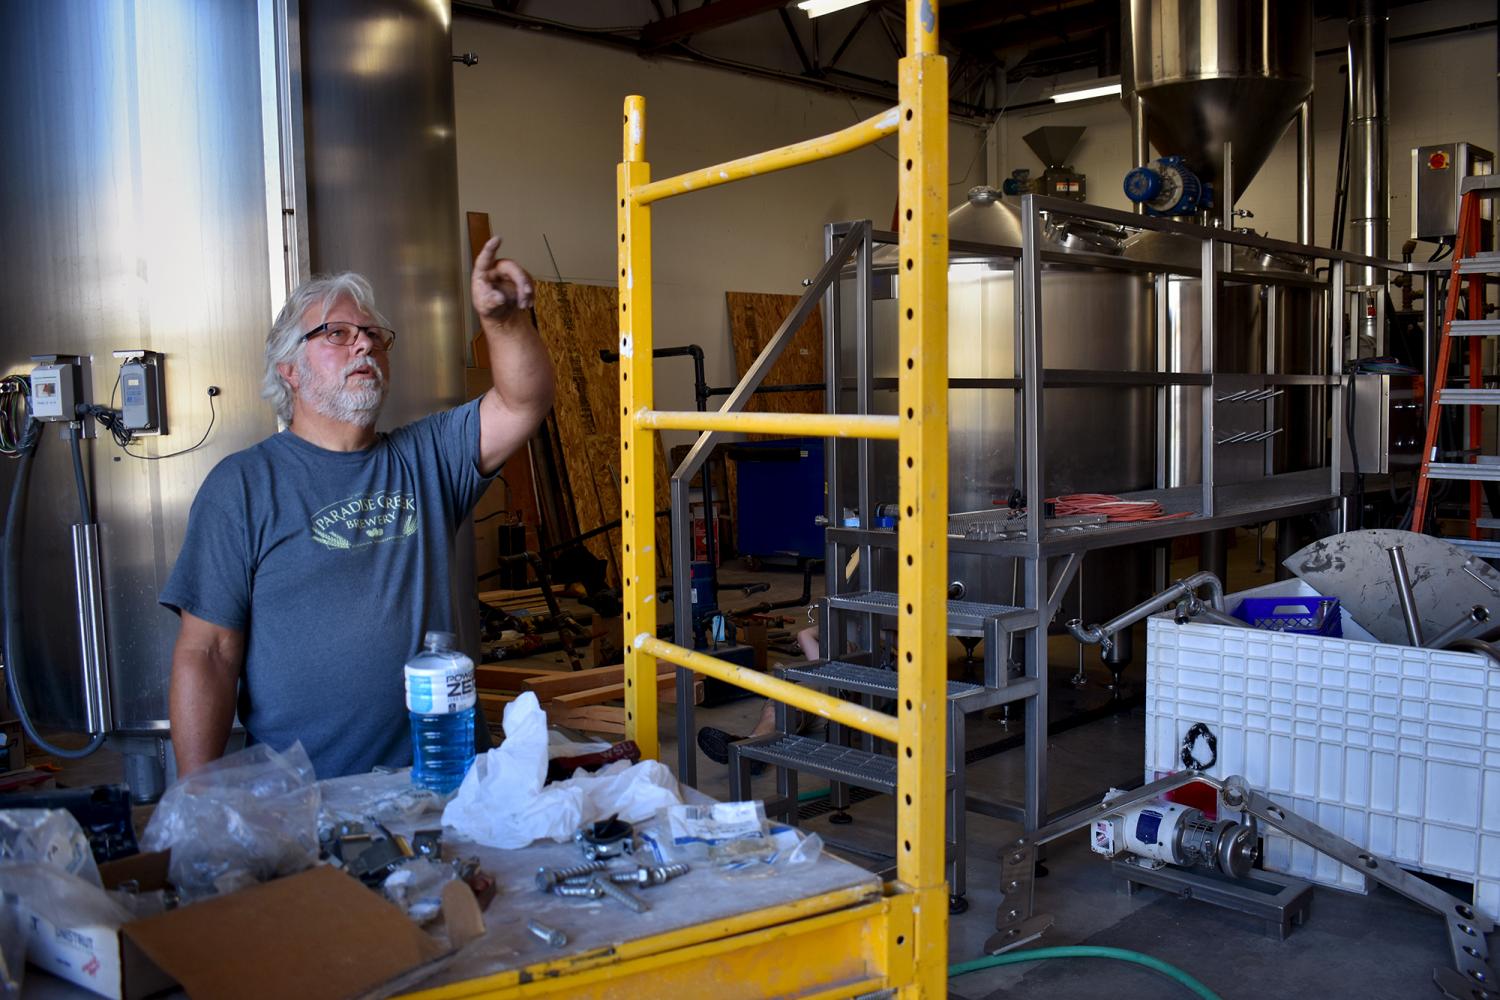 Tom Handy discusses the bare bones aesthetic and laid-back vibe of the new 
Paradise Creek Trailside bar; the brewerys grinder, boil kettle, and fermenter tanks will be visible to future patrons of the bar. 